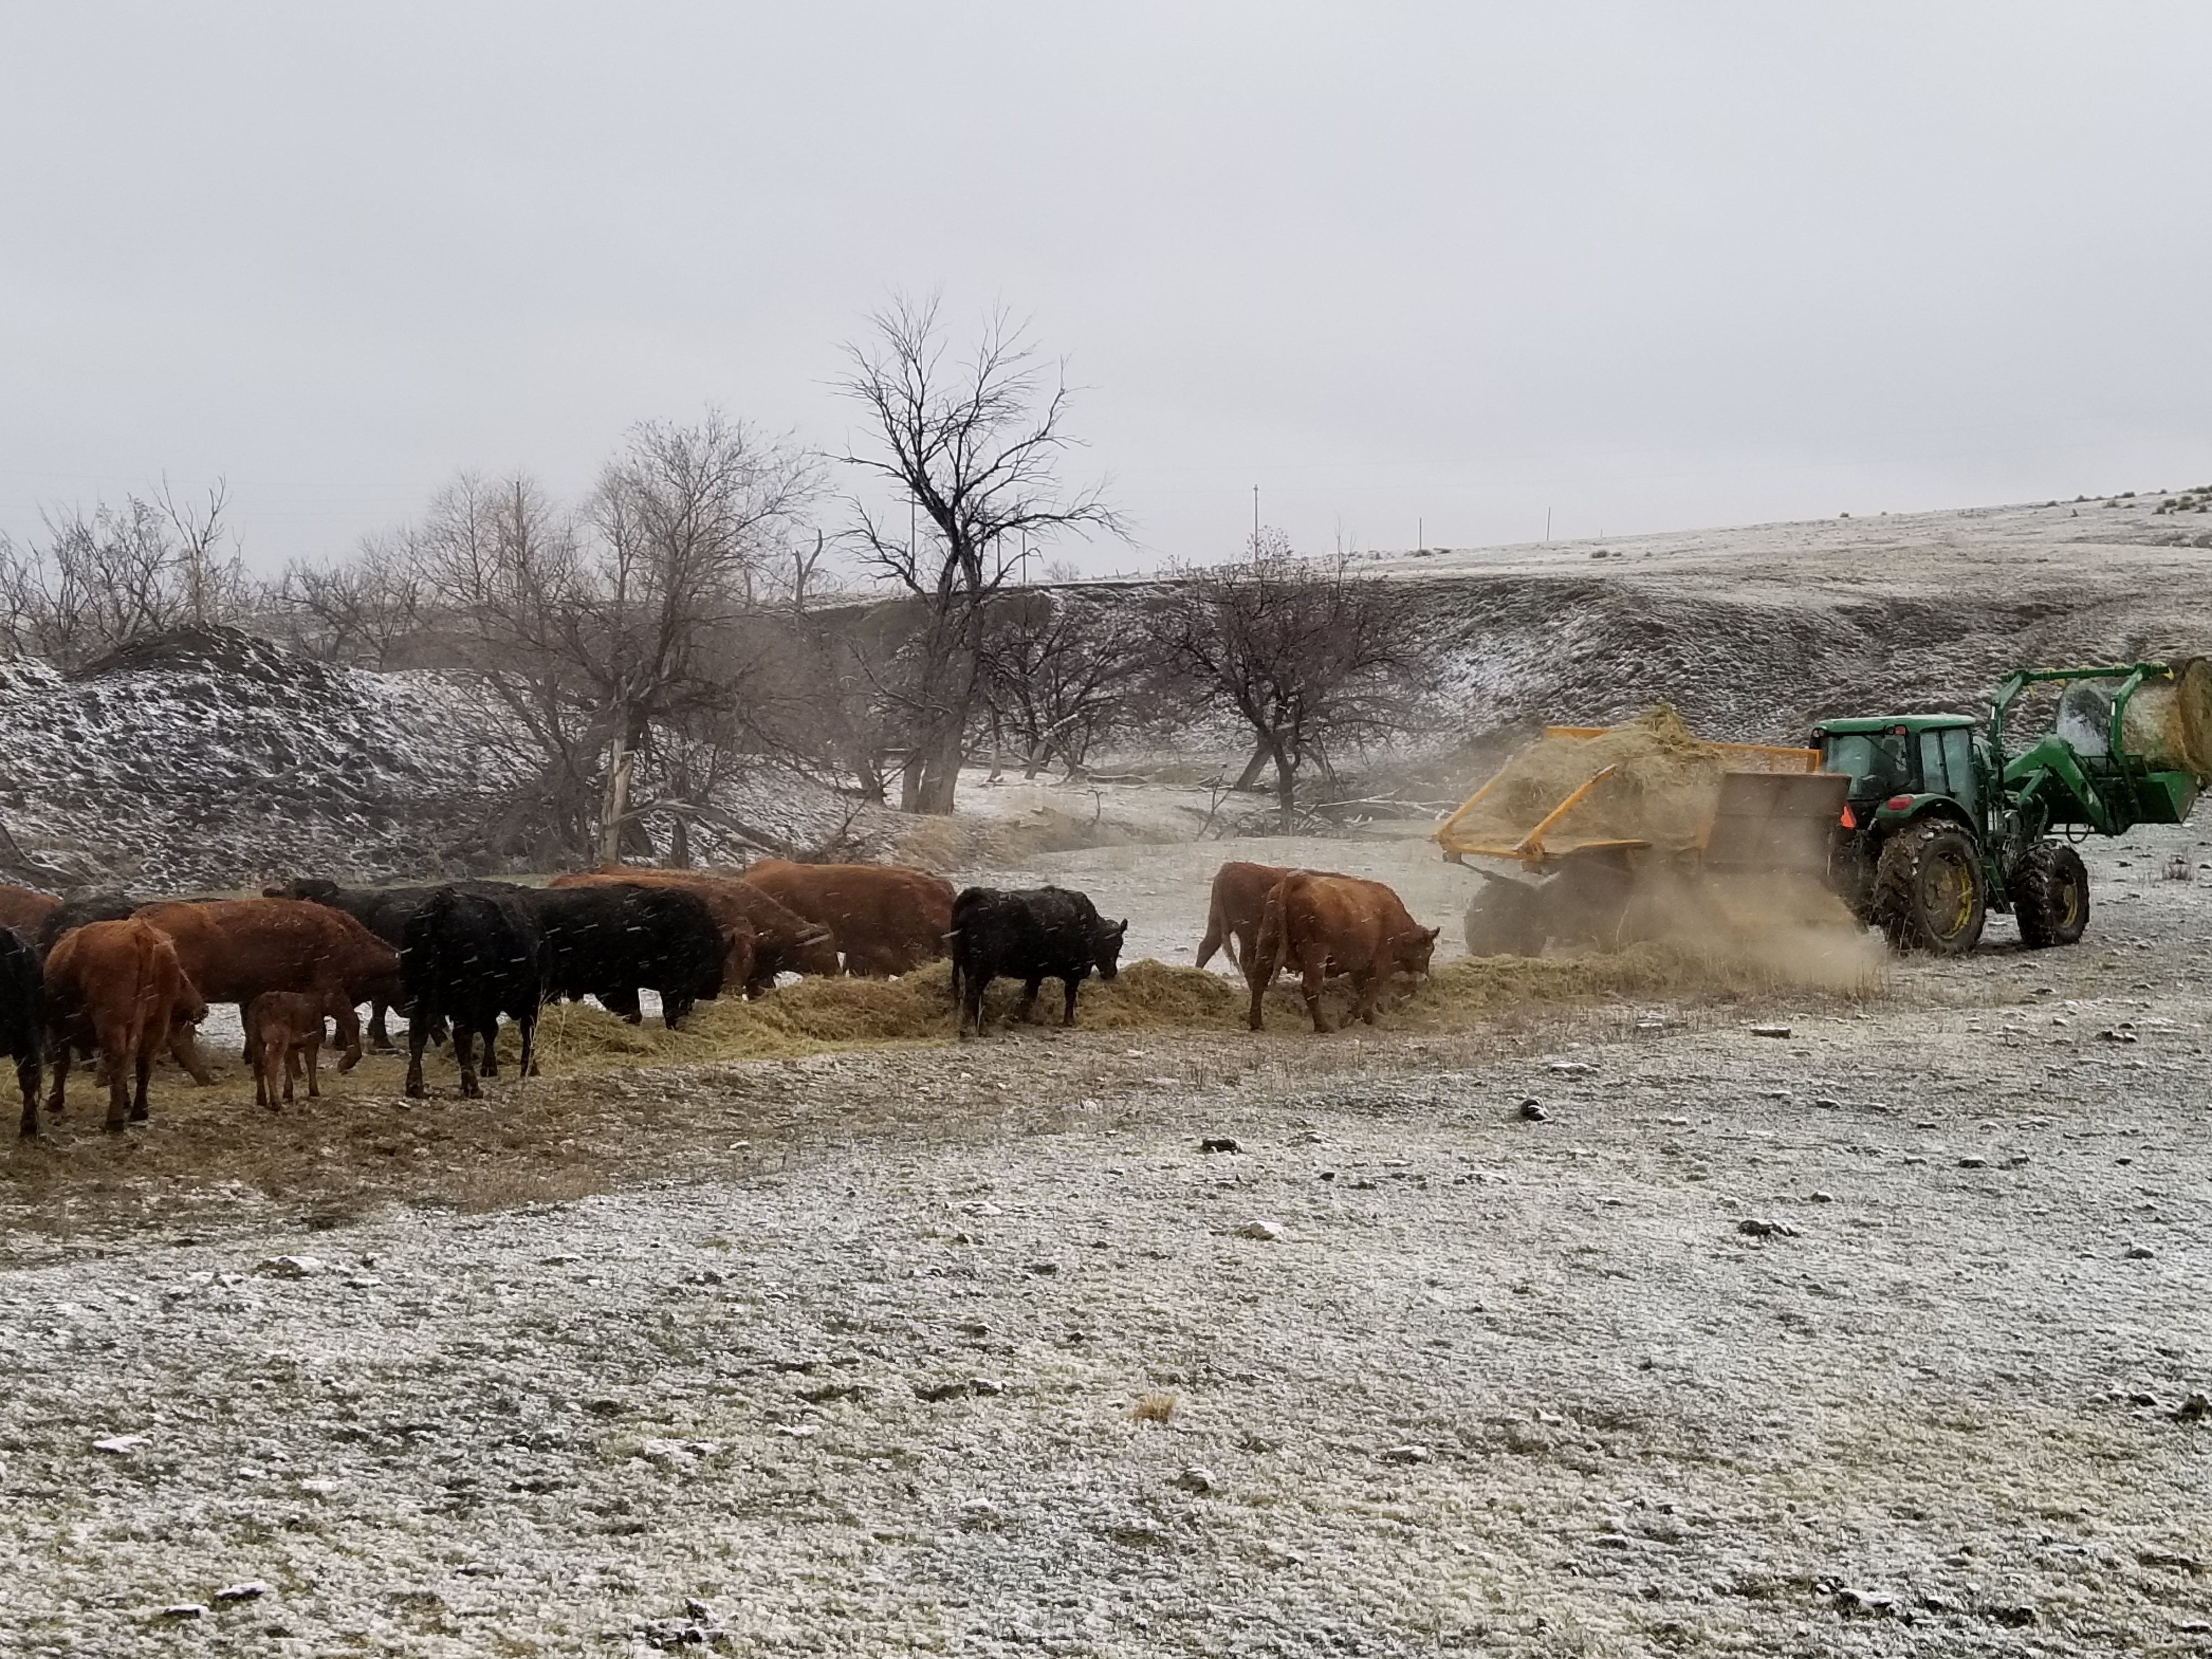 Drought-stressed forages can be high in nitrates and cause toxicity issues in cattle. (NDSU photo)